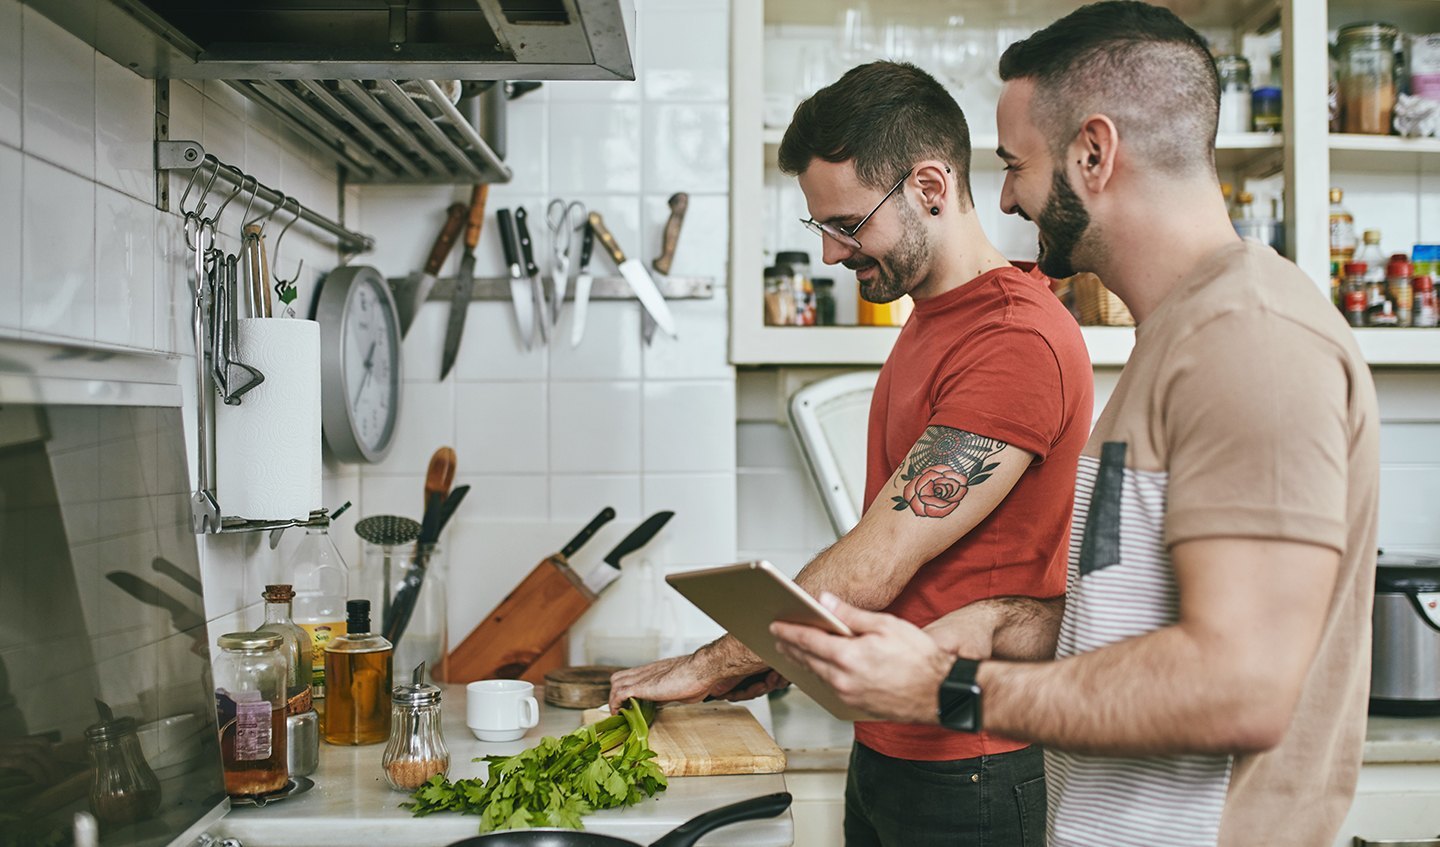 Two men cooking in the kitchen using an ipad to refer to a recipe